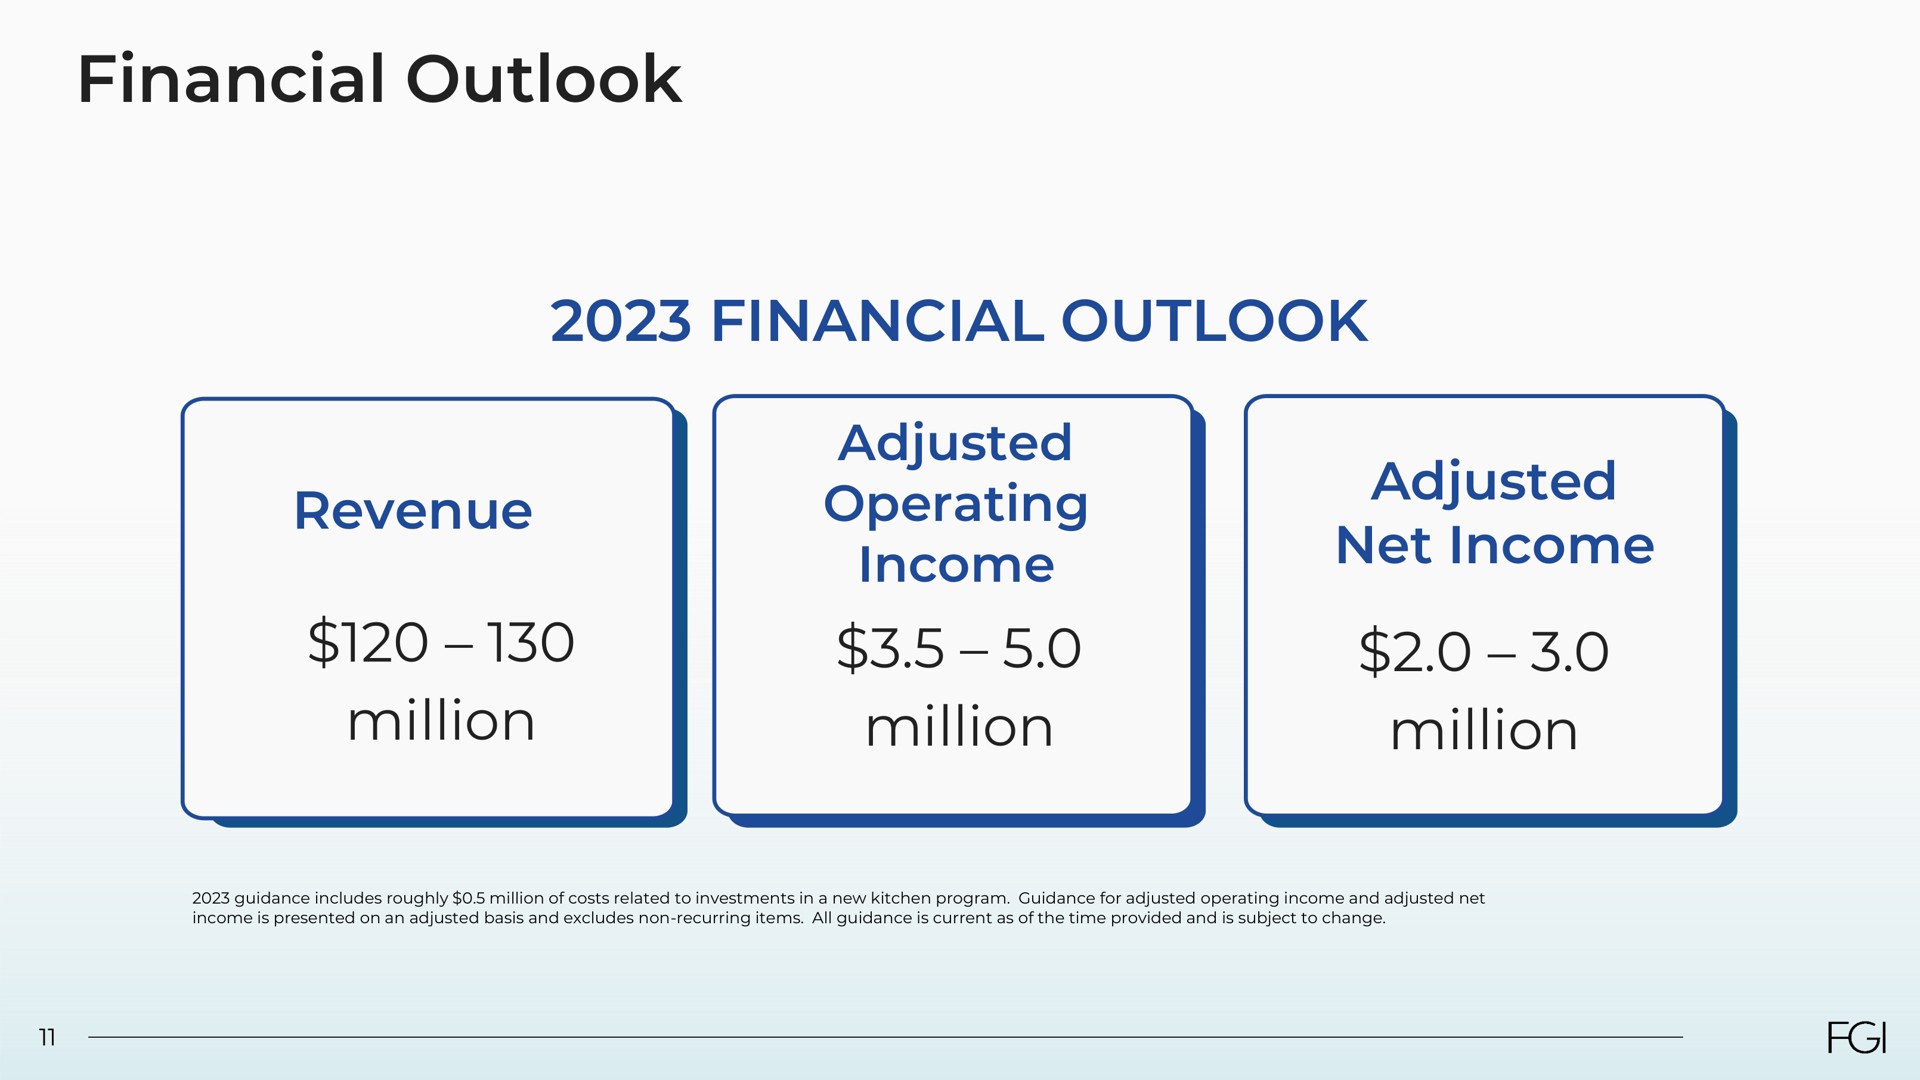 financial outlook financial outlook revenue million adjusted operating income million adjusted net income million | FGI Industries